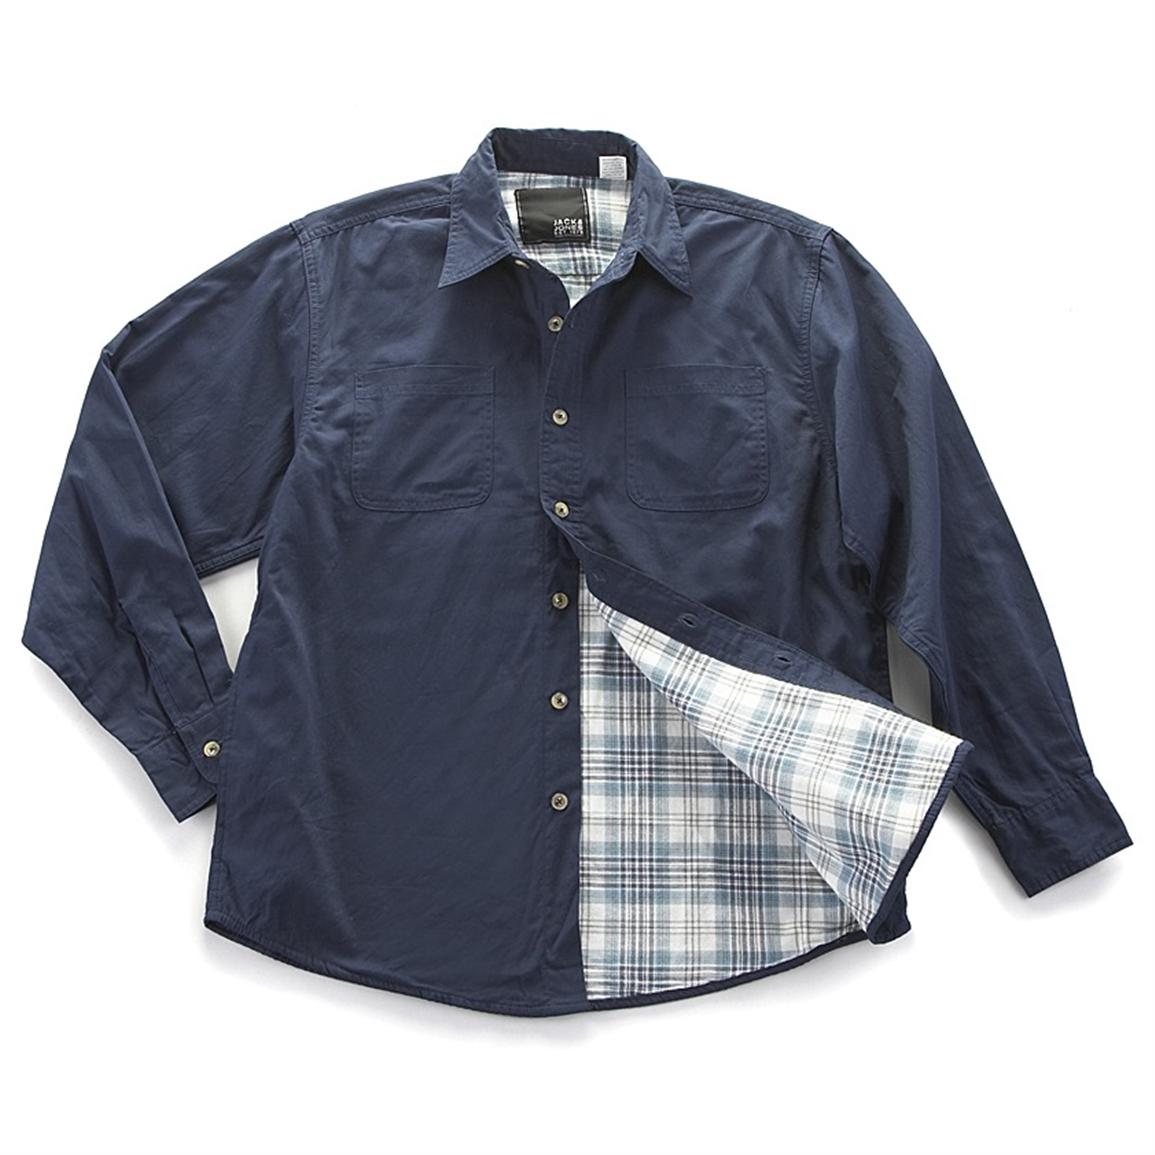 Flannel - lined Cotton / Canvas Shirts - 201751, Shirts at Sportsman's